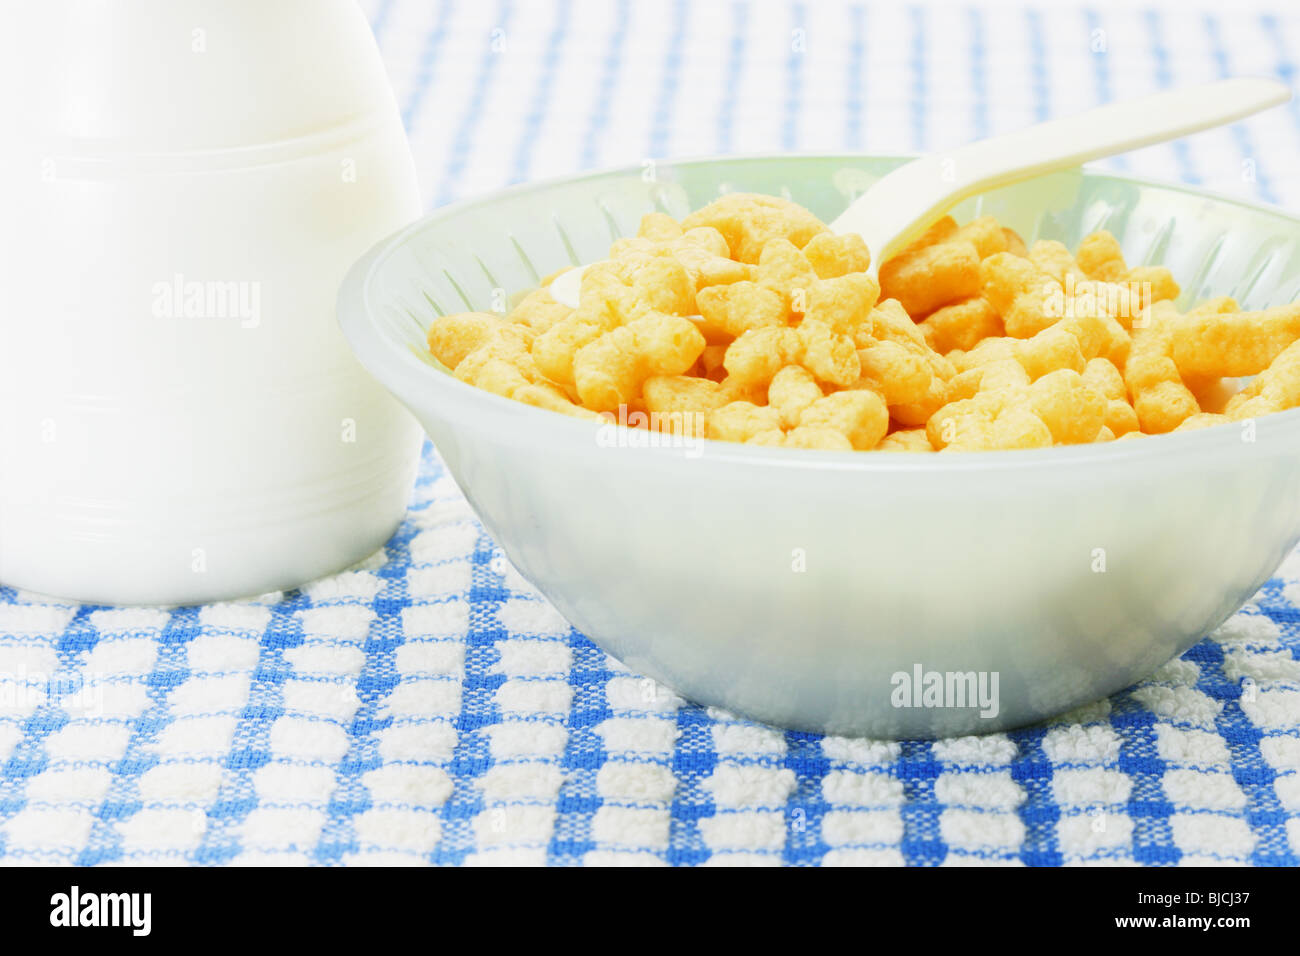 Bowl of cereal milk bottle Cut Out Stock Images & Pictures - Alamy